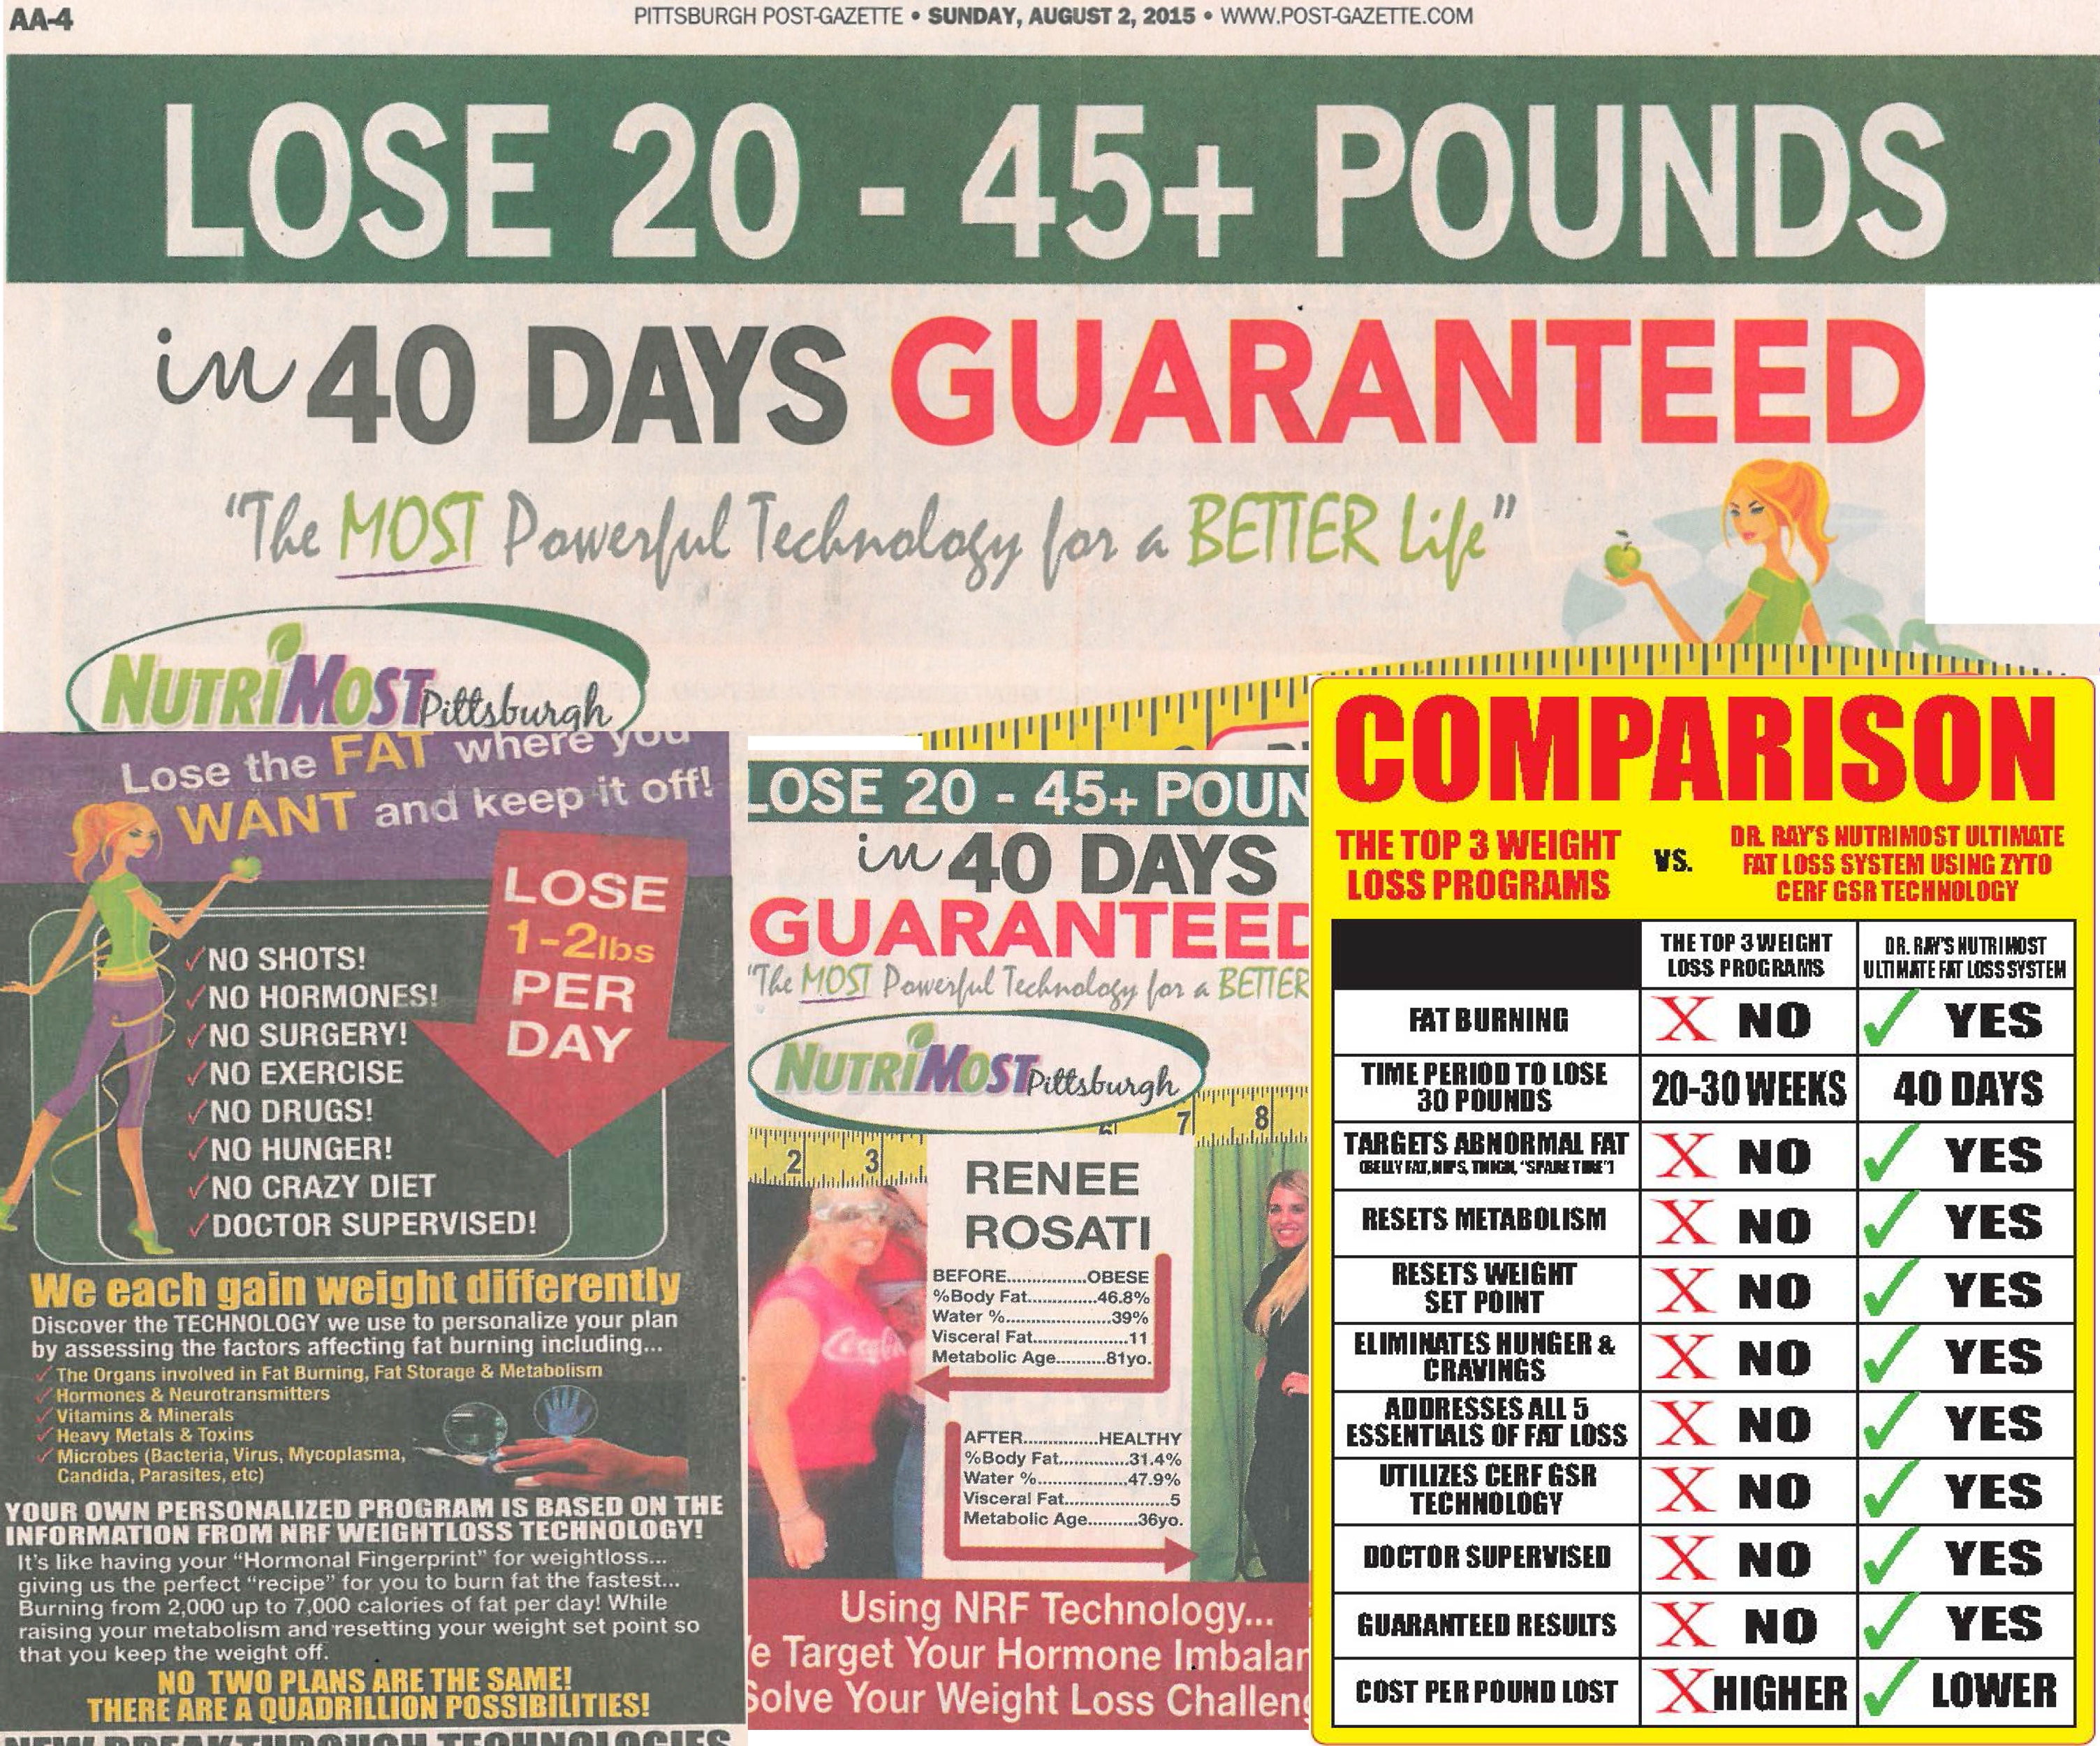 NutriMost ‘Ultimate Fat Loss’ System Slammed With $32 Million Judgment For Overblown Weight Loss Claims